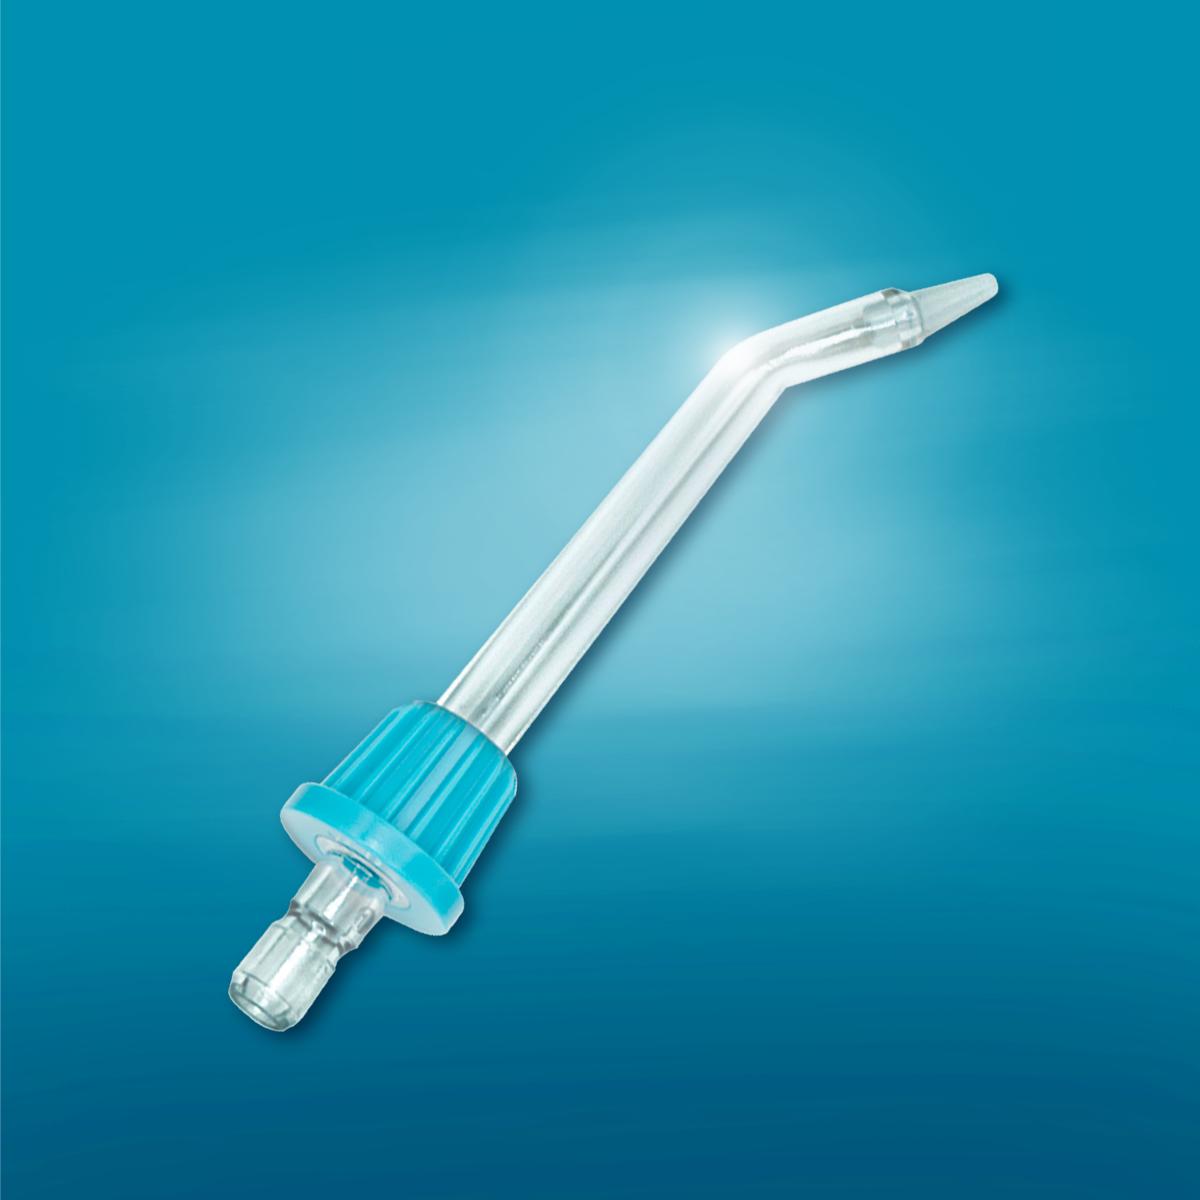 Curved glass pipette with a blue rubber bulb on a blue background.